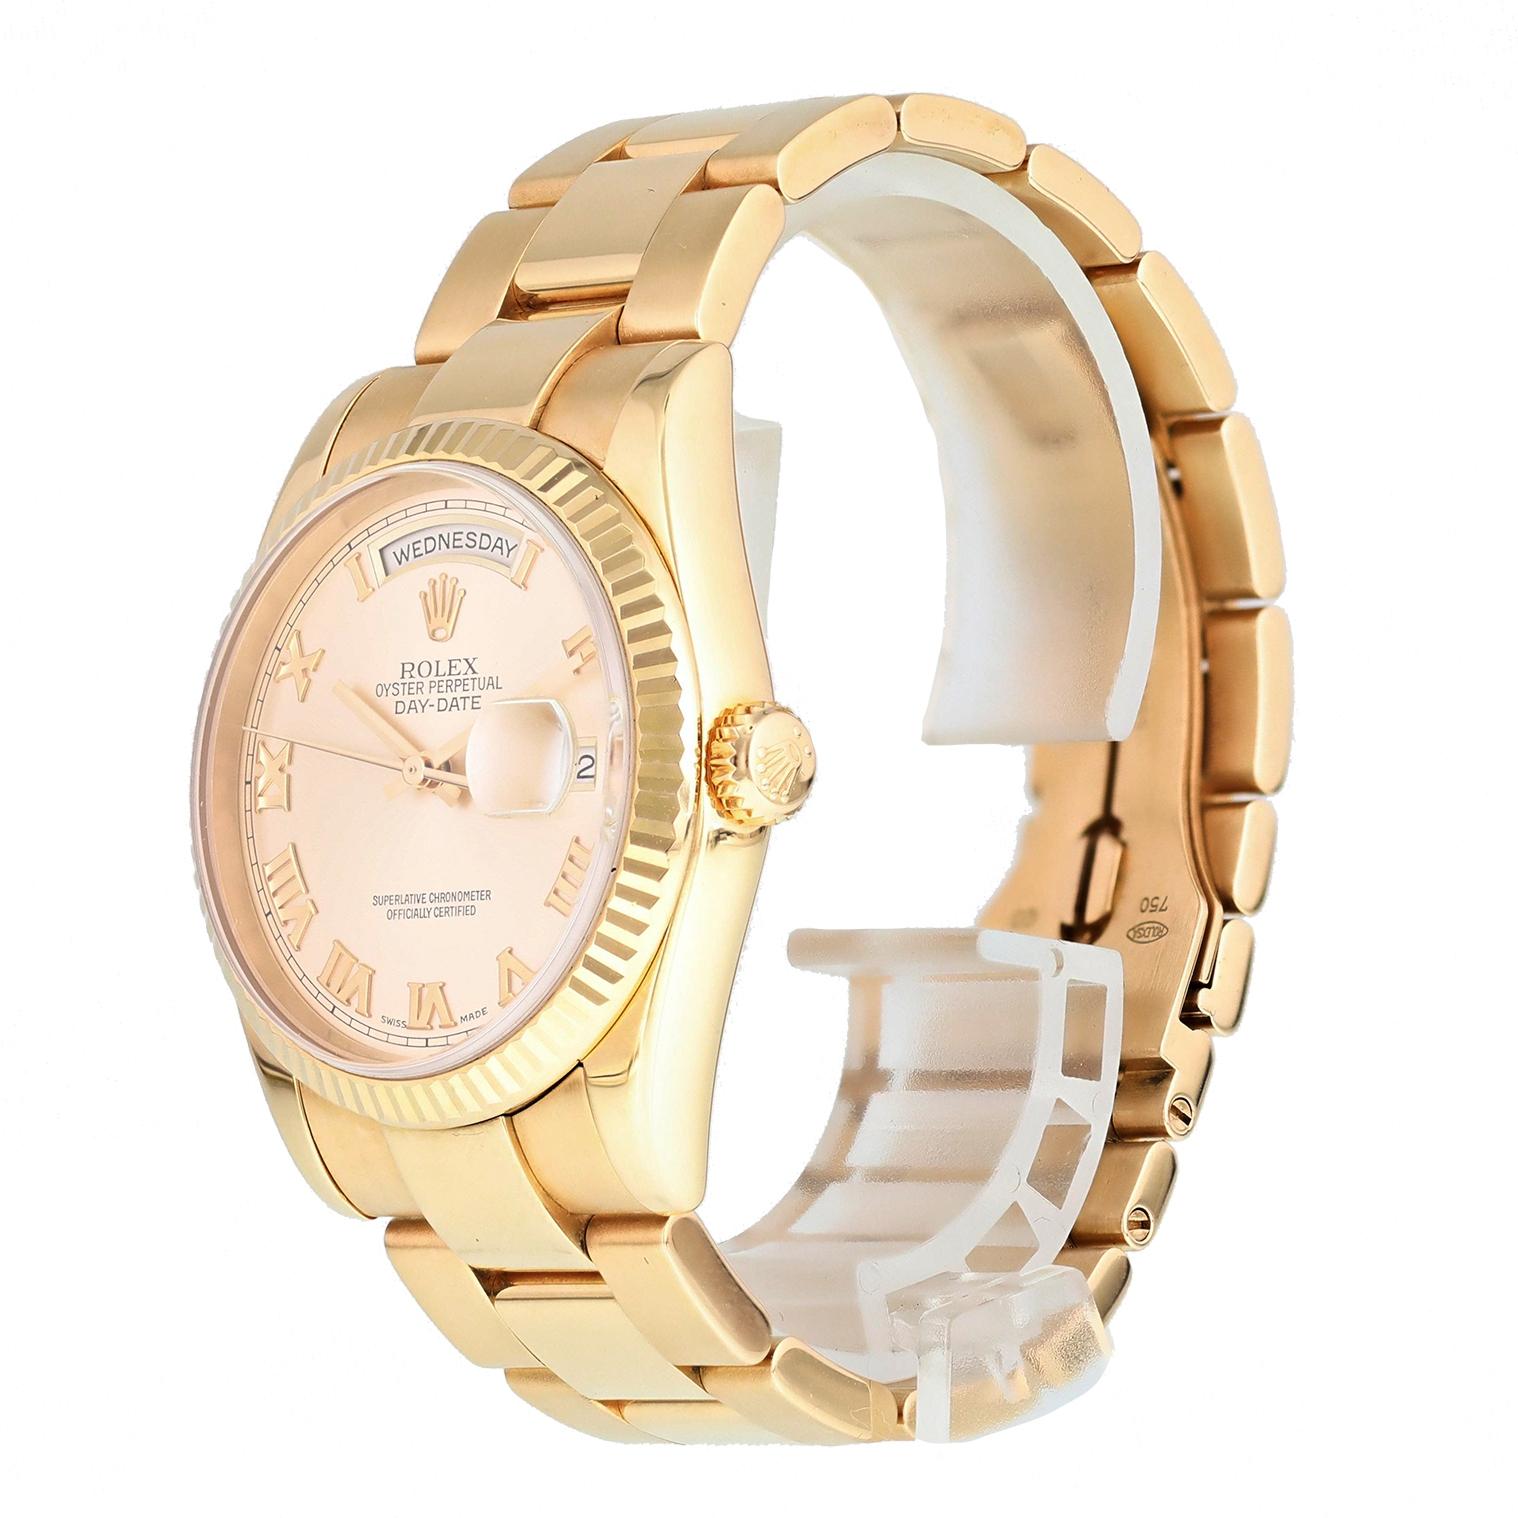 Rolex Day Date 118235 President 18k Rose Gold Watch. 
36mm 18k Rose Gold case. 
White Gold Stationary bezel. 
Pink dial with Luminous gold hands and index hour markers. 
Minute markers on the outer dial. 
Date display at the 3 o'clock position.